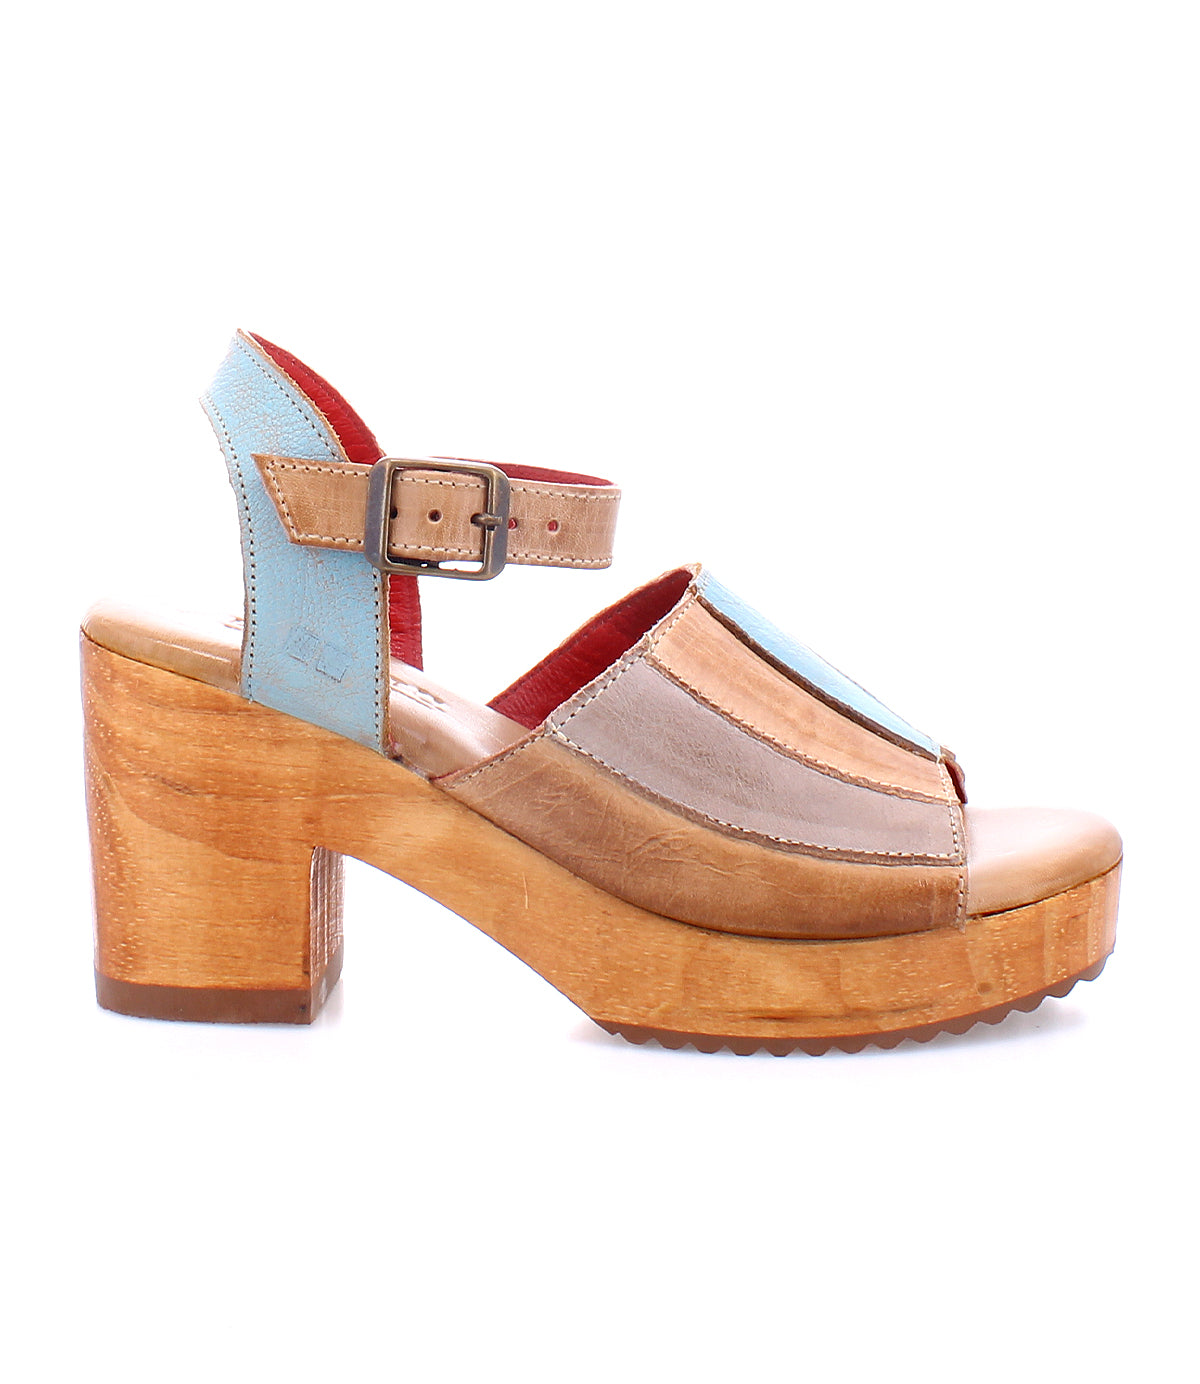 A pair of Bed Stu Jetsetter women's sandals with a wooden heel and leather finish.